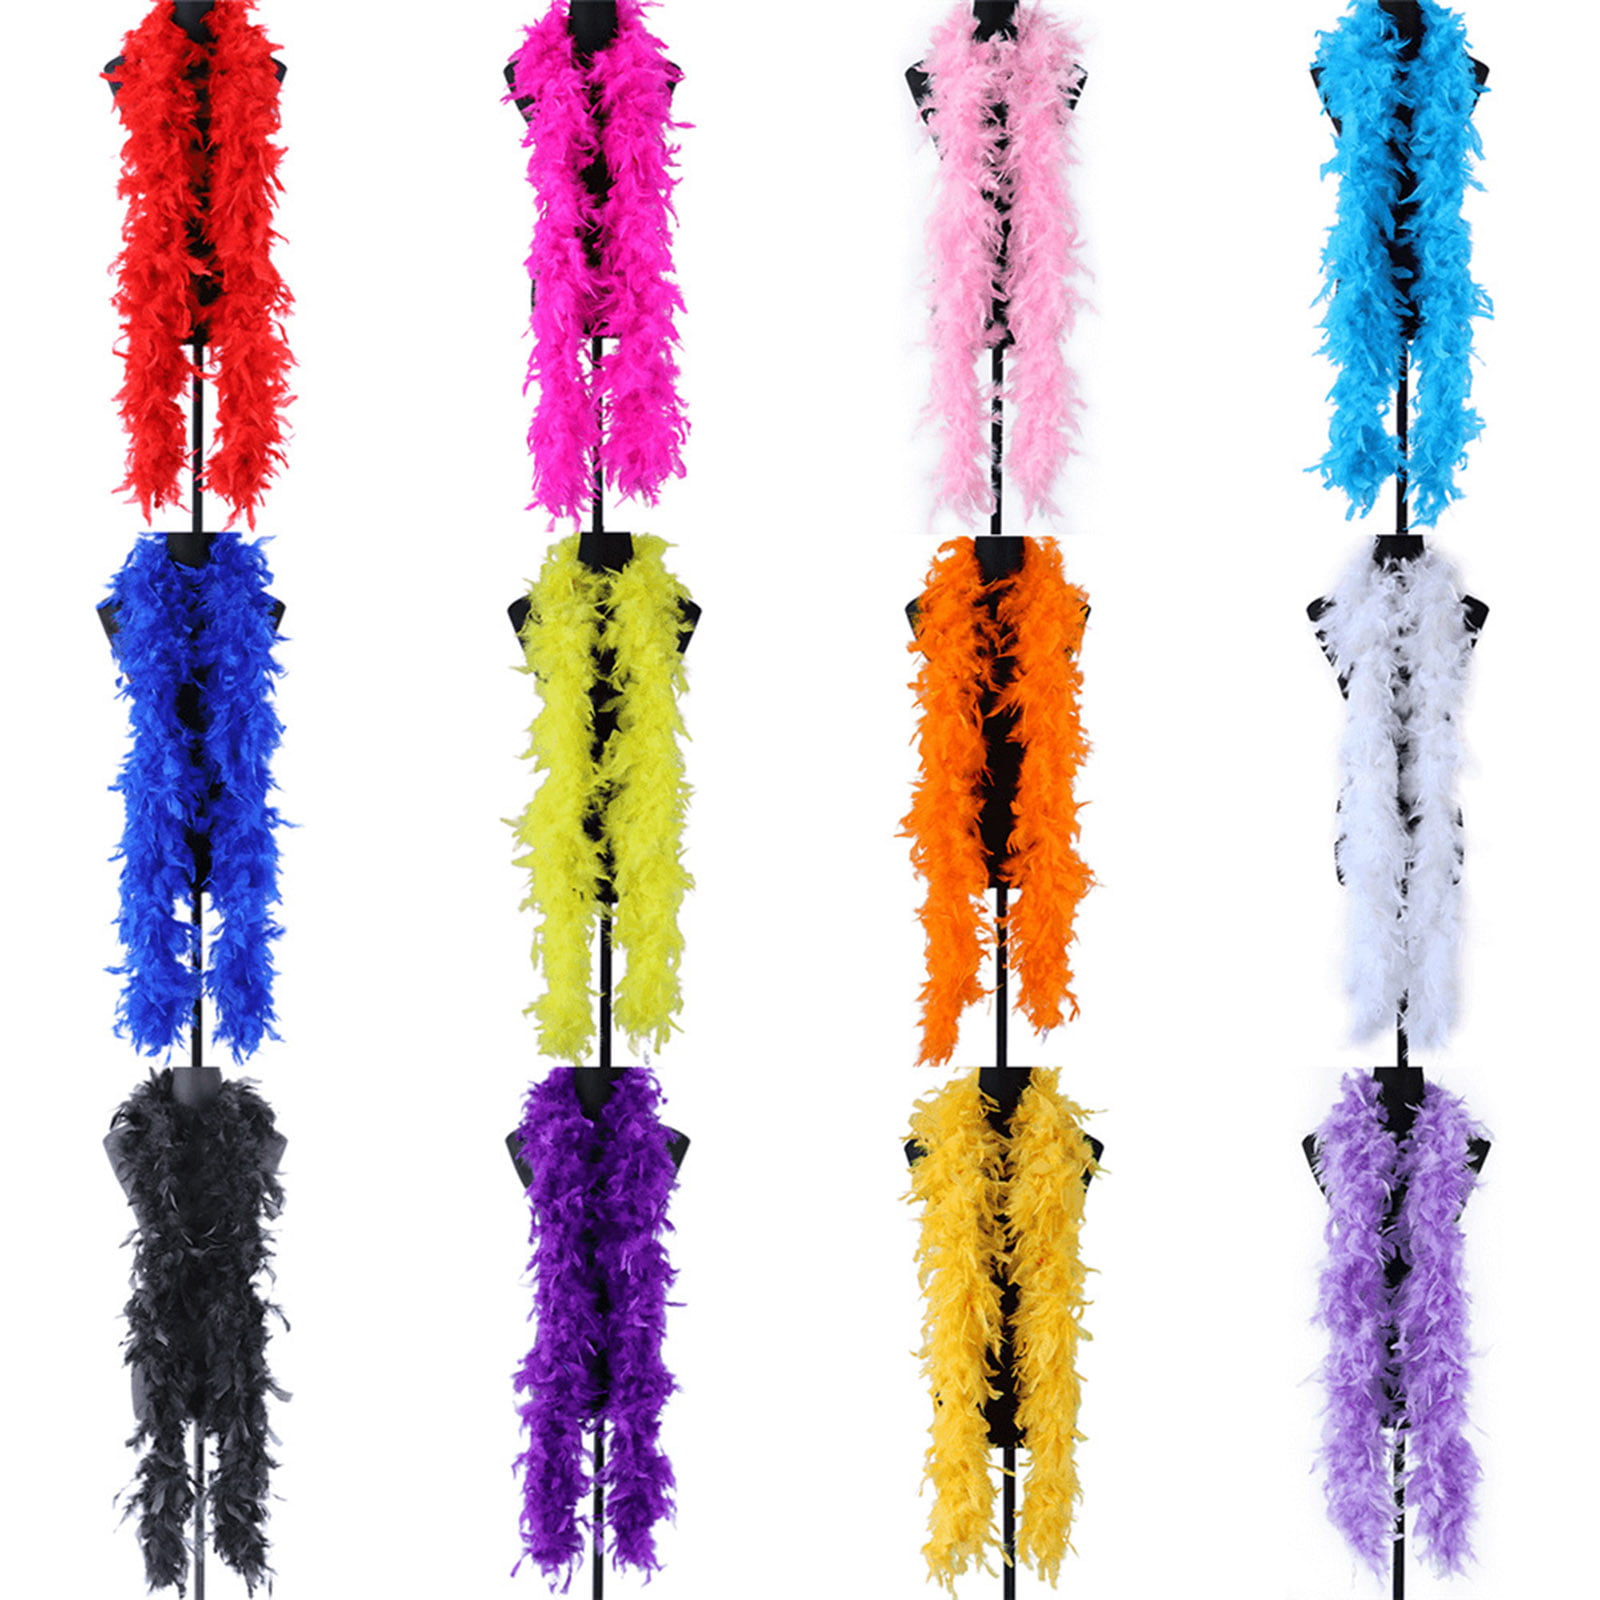 Larryhot Hot Pink Feather Boa - 80g 2Yards Feather  